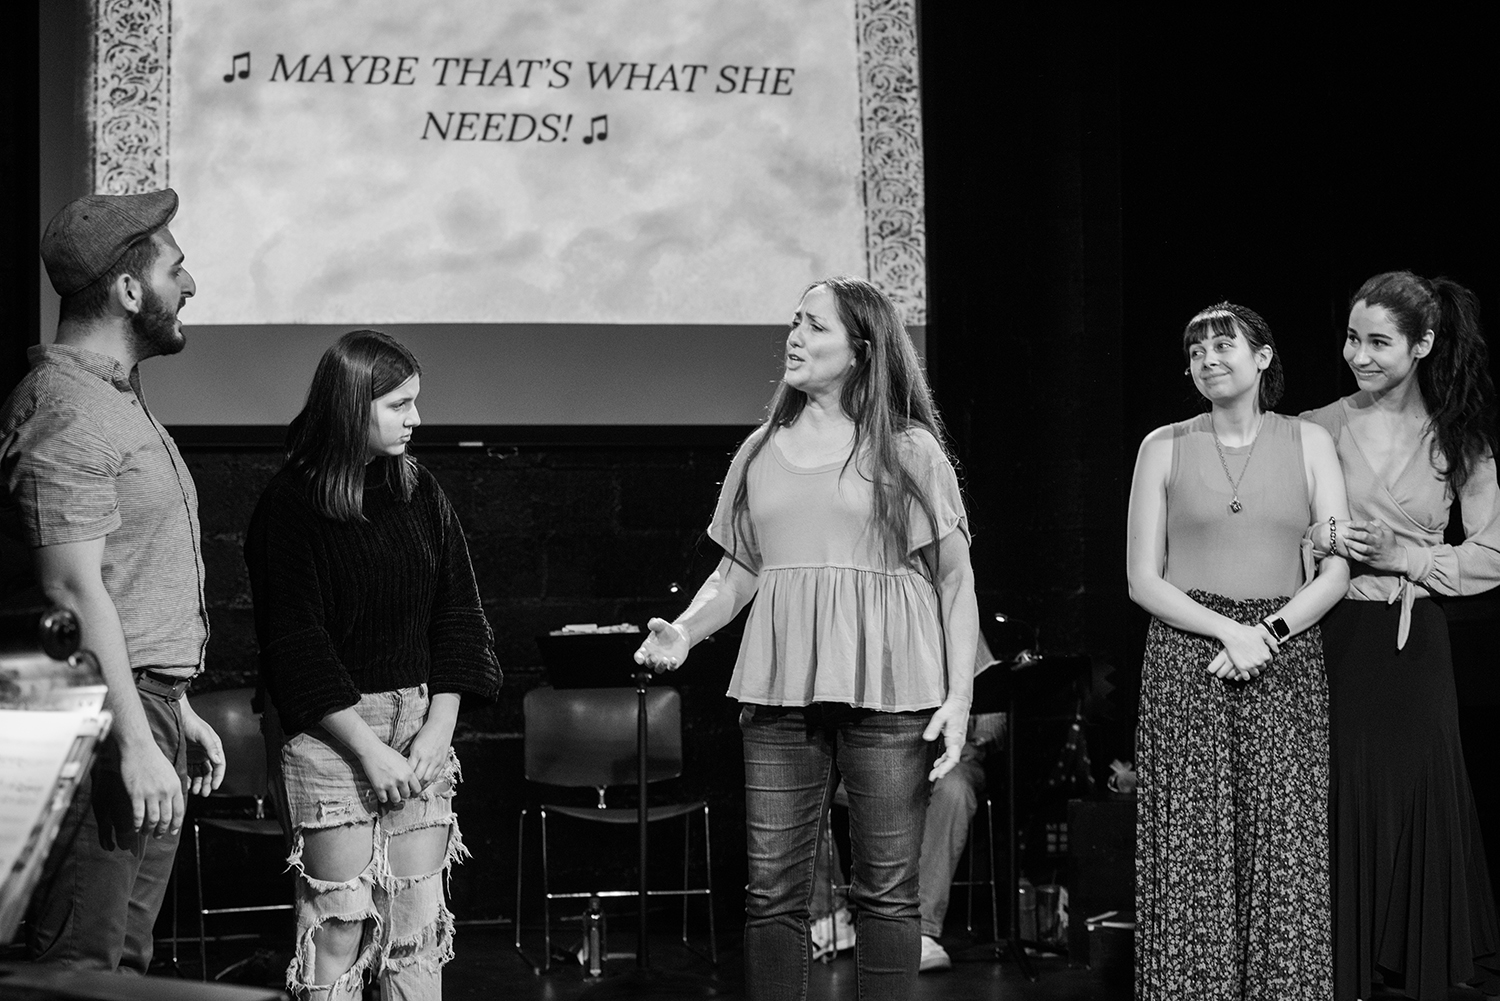 Christopher Isolano, Catalene Sacchetti-Manganelli, Tamra Hayden and April Lavalle in the ASL / English musical "Stepchild."